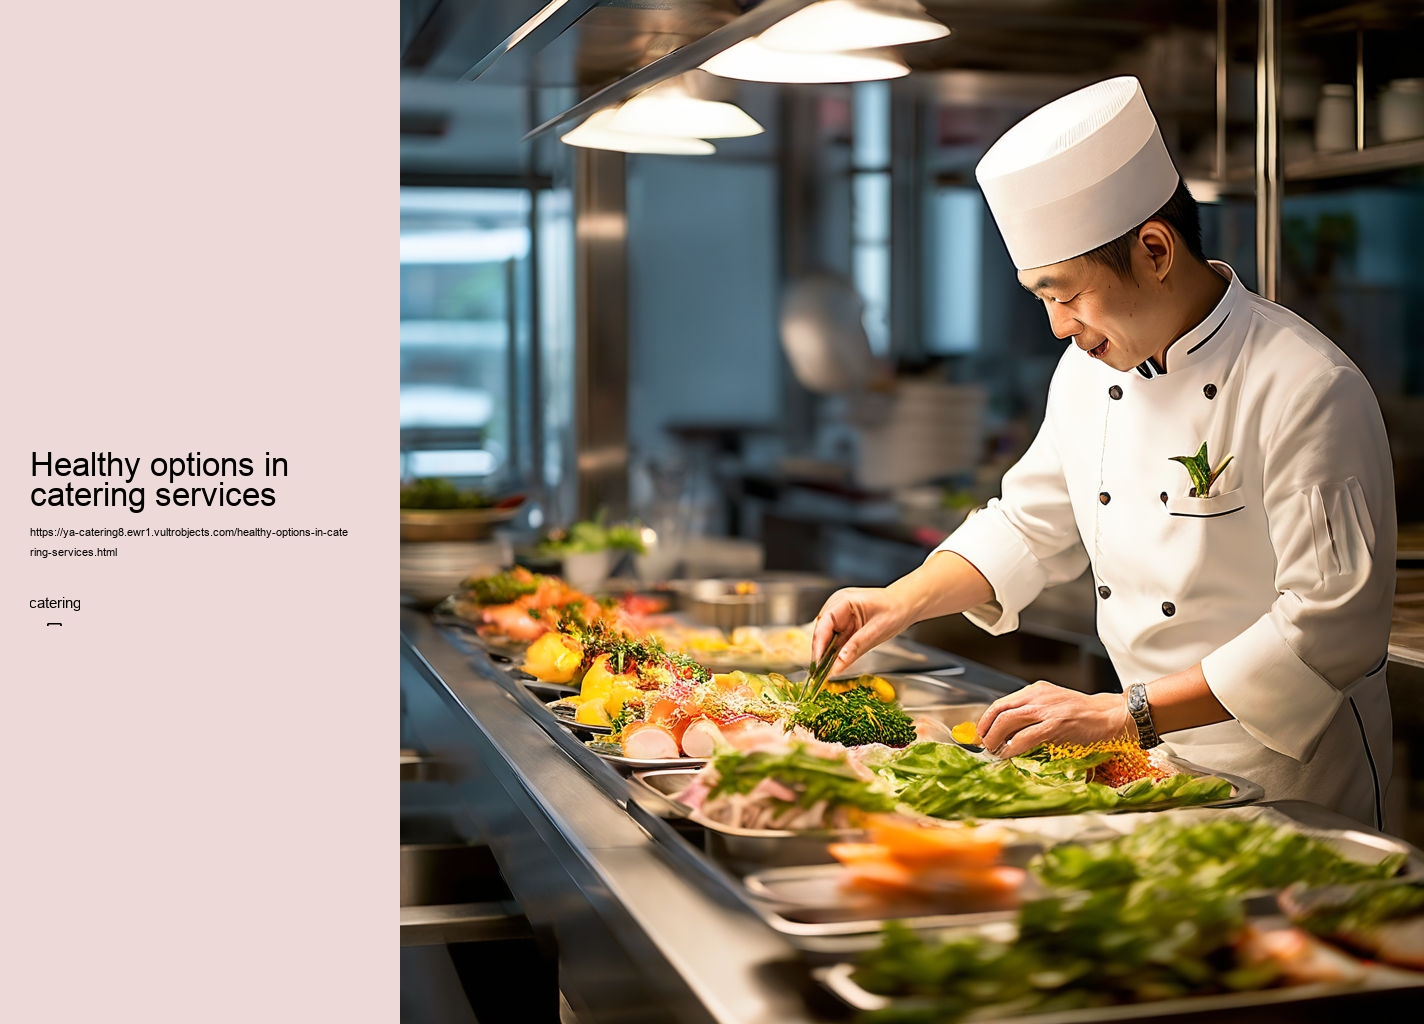 Healthy options in catering services